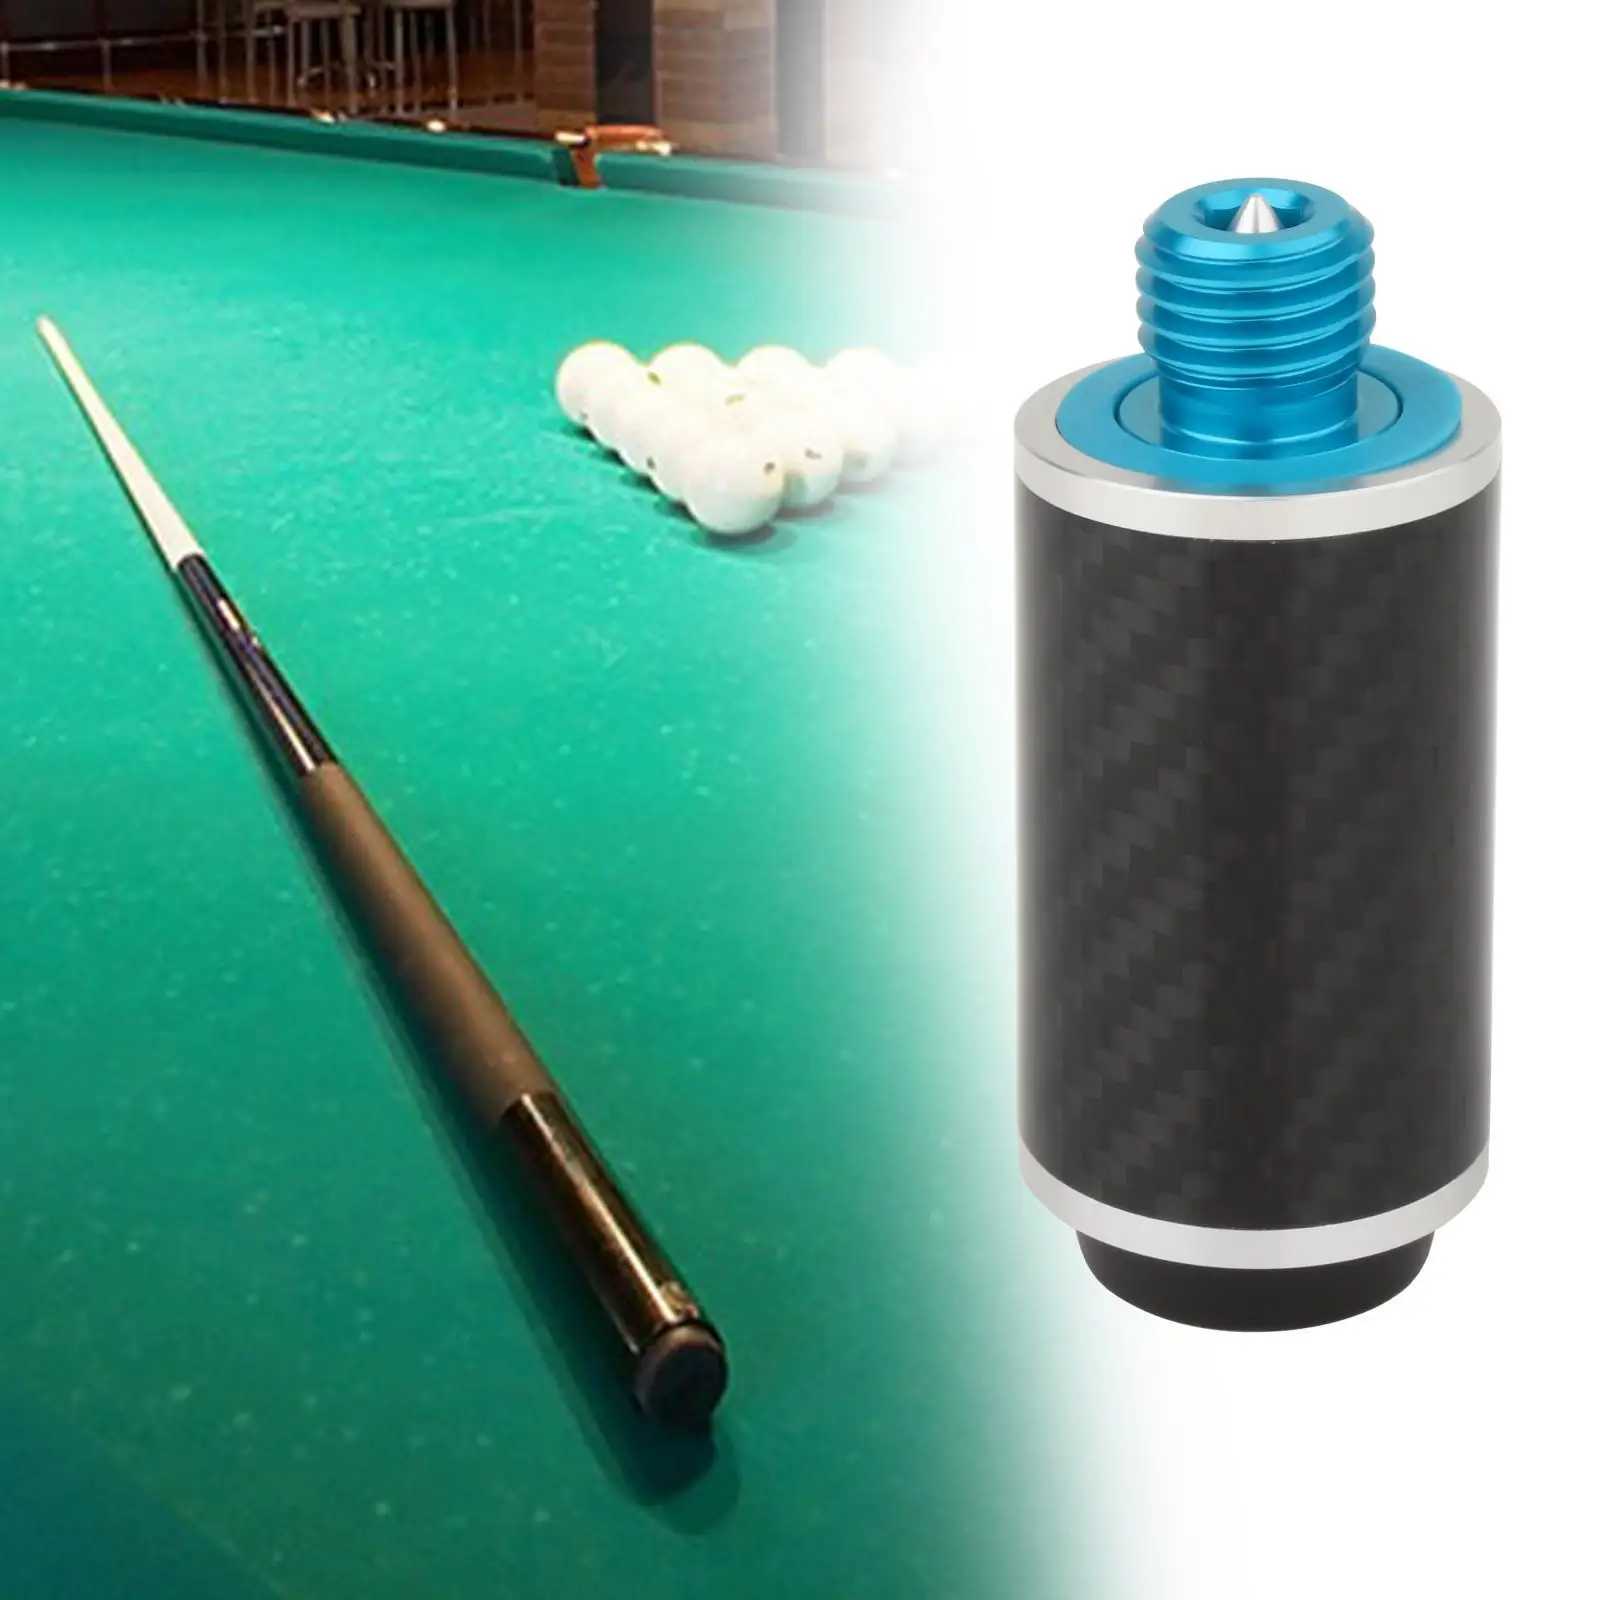 Snooker Cue Stick Extender Billiards Pool Cue Extension Athlete Weights Replacement Billiard Connect Shaft Diameter 1.3in